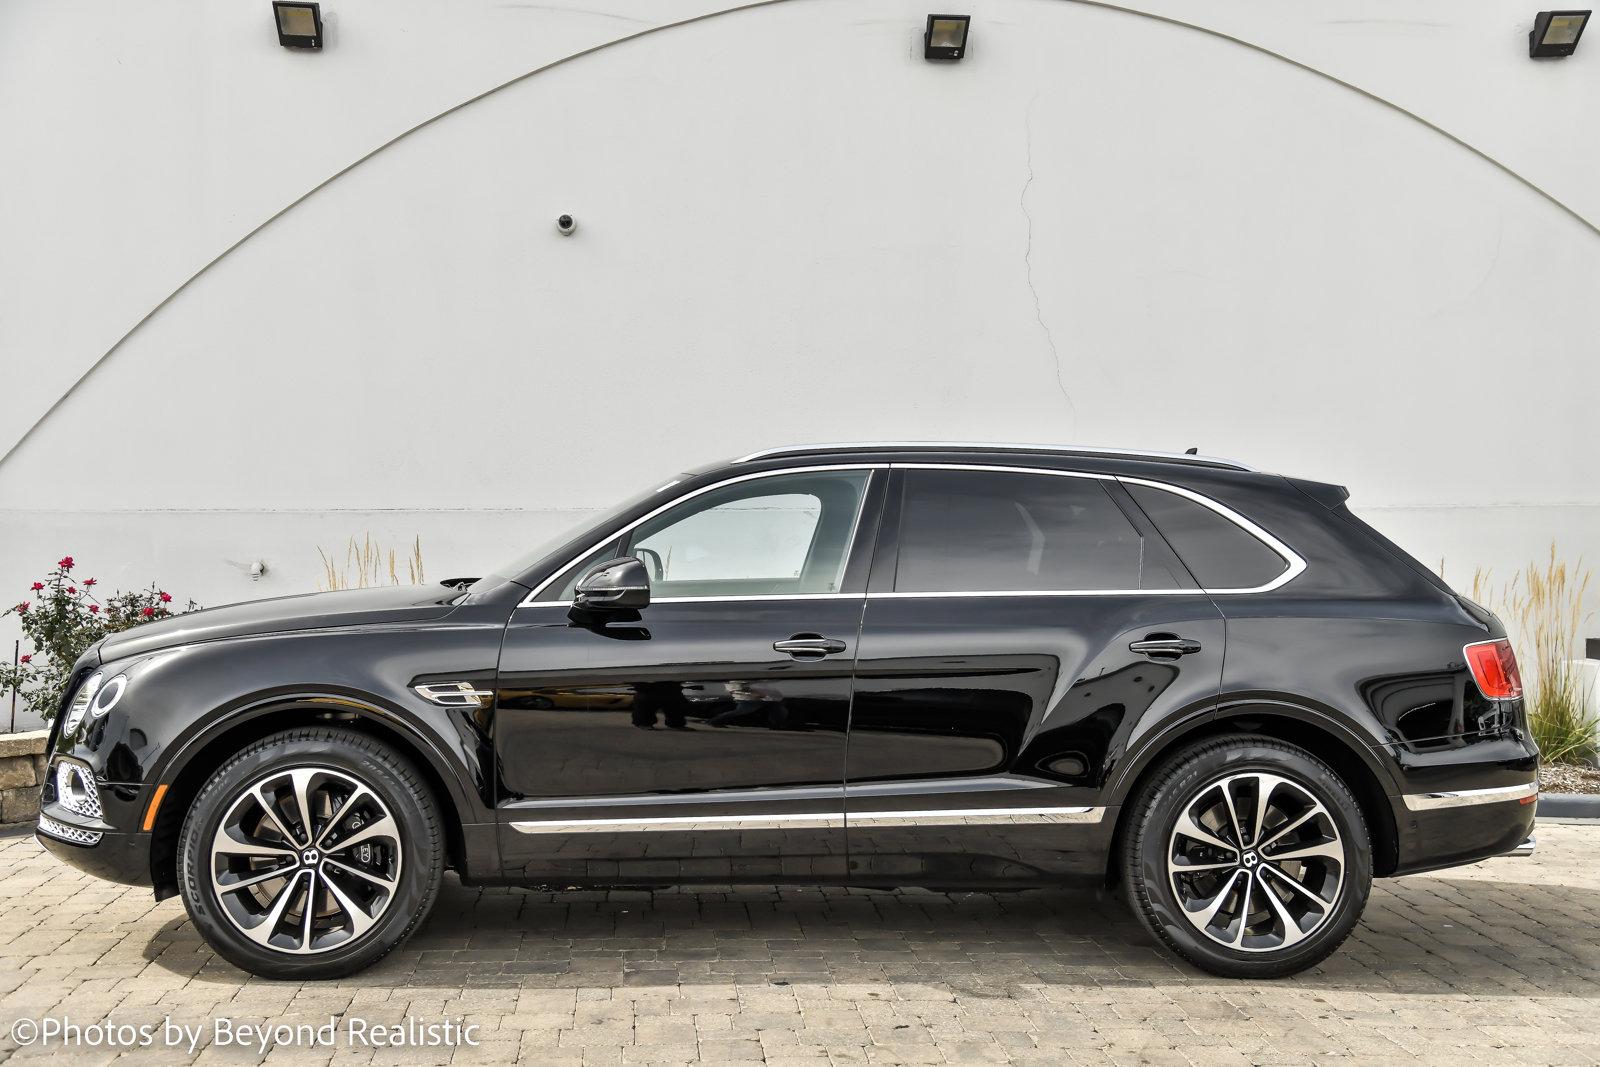 Used 2018 Bentley Bentayga W12 Signature, Touring Specification | Downers Grove, IL